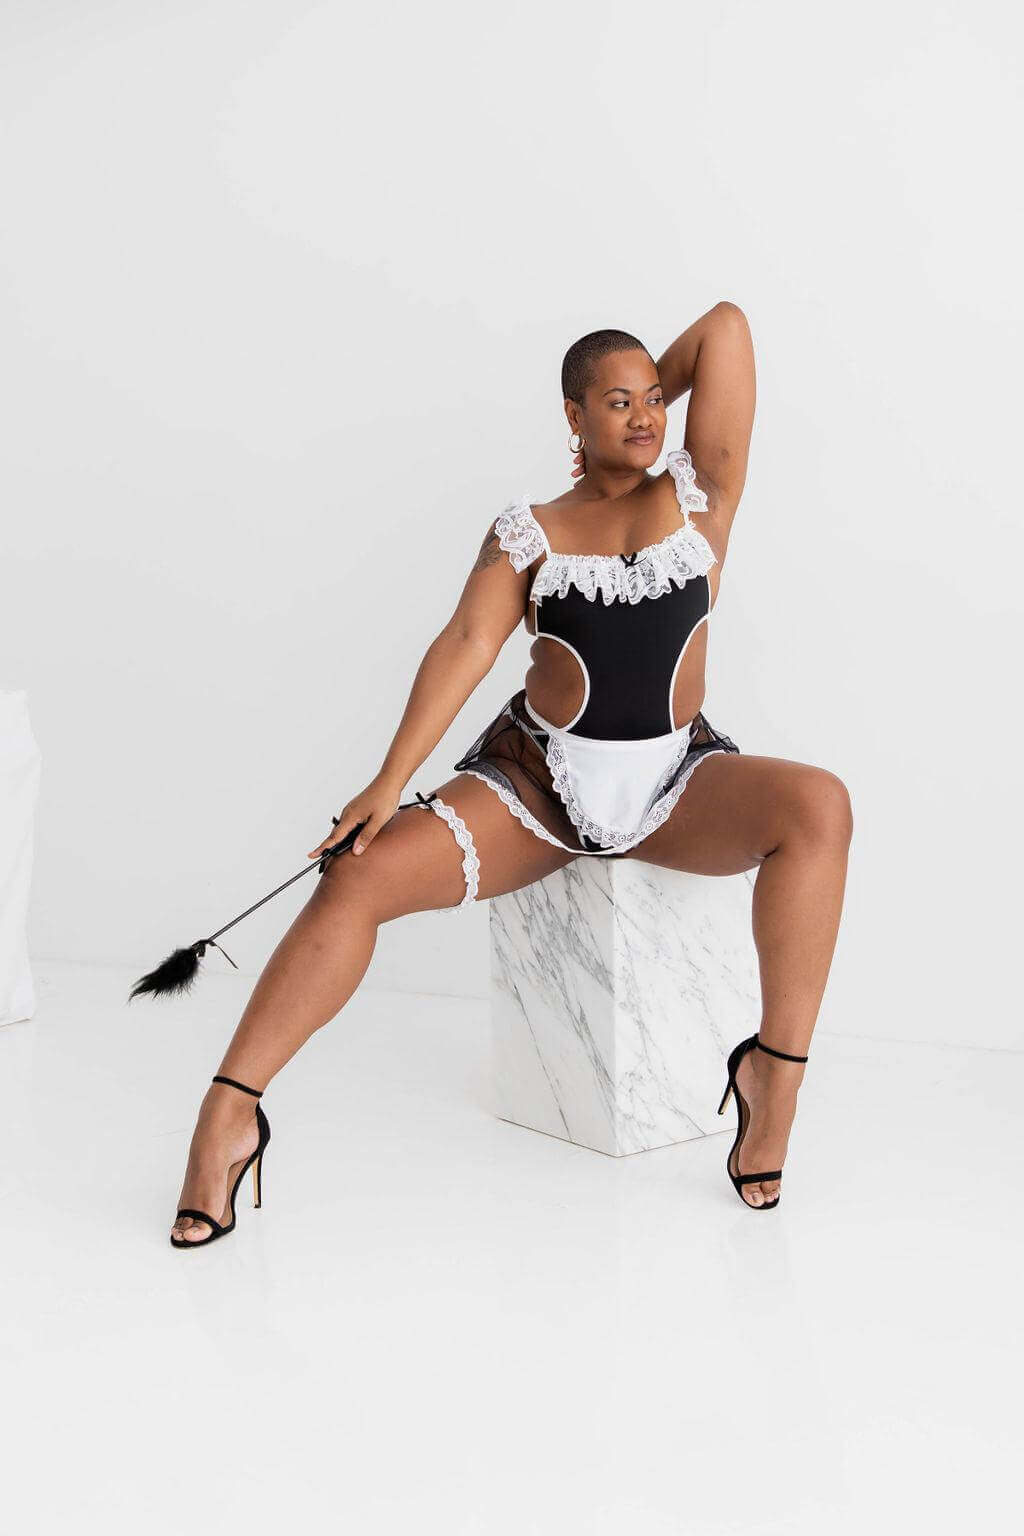 Amy Maid Lace Lingerie Costume - $68.00 - costume - Naked Curve